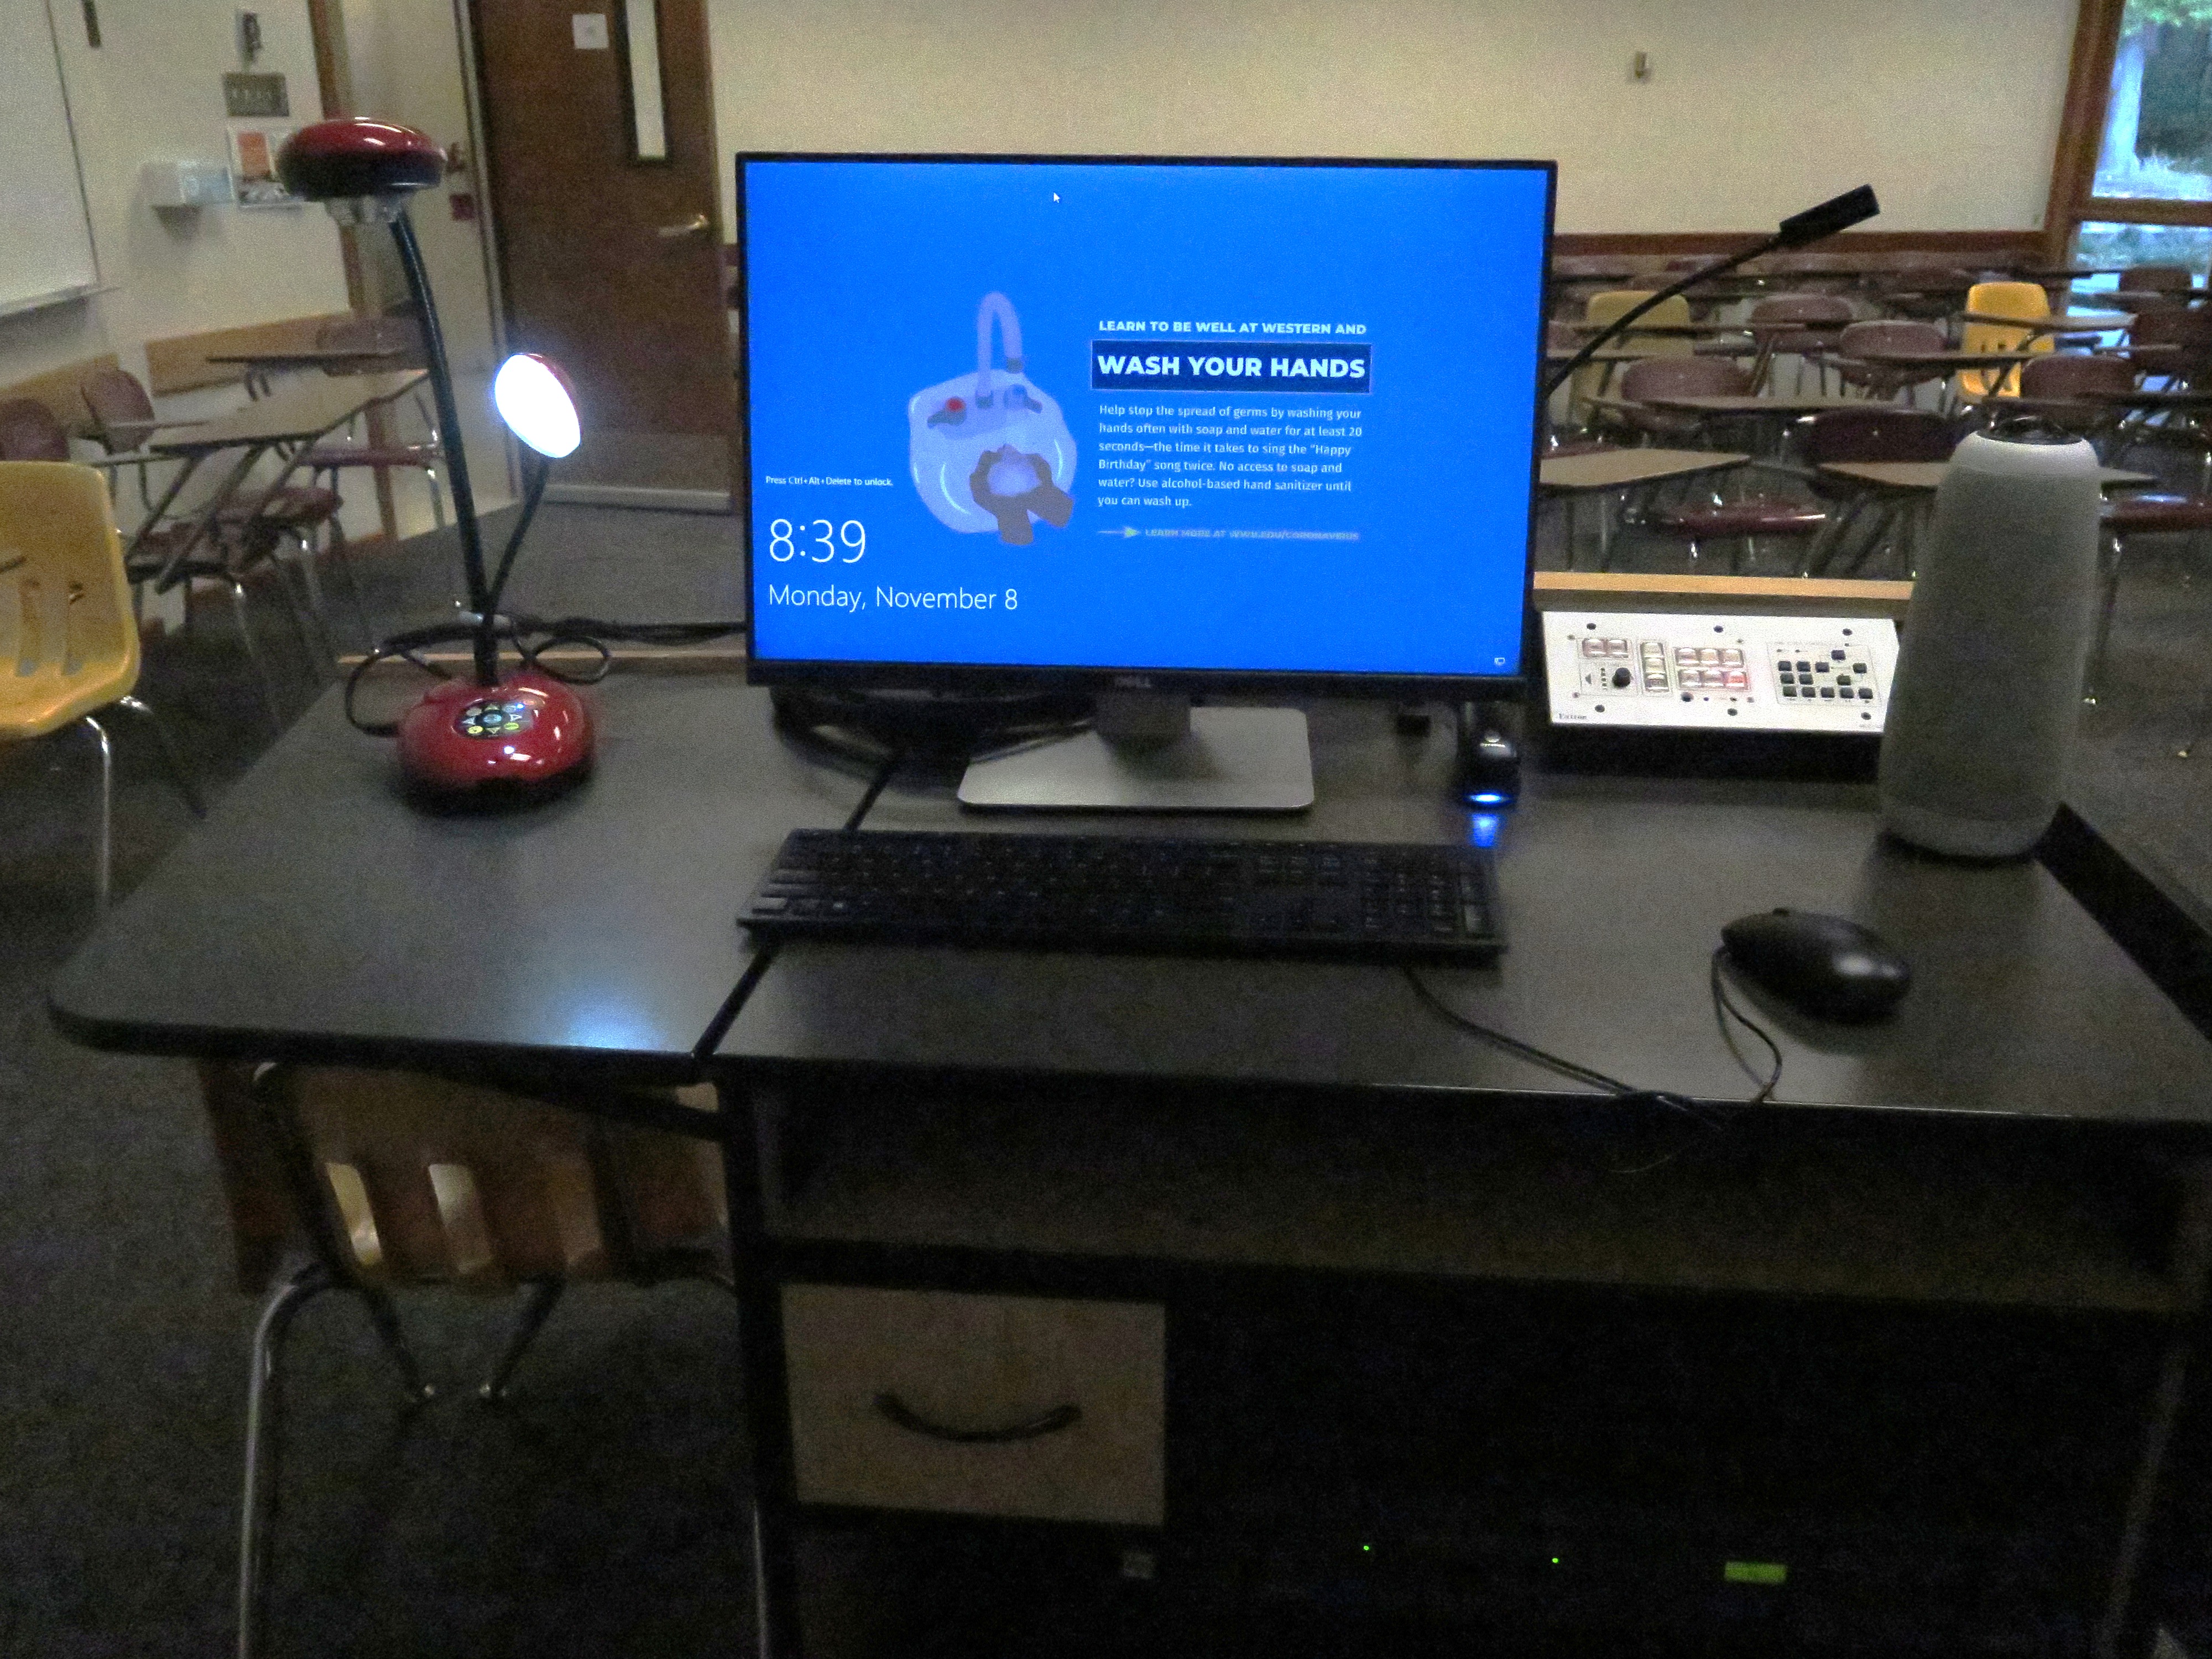 Top of the podium has a Lumens Ladybug document camera, Dell PC Monitor, AV push button Controller, and an Owl Camera